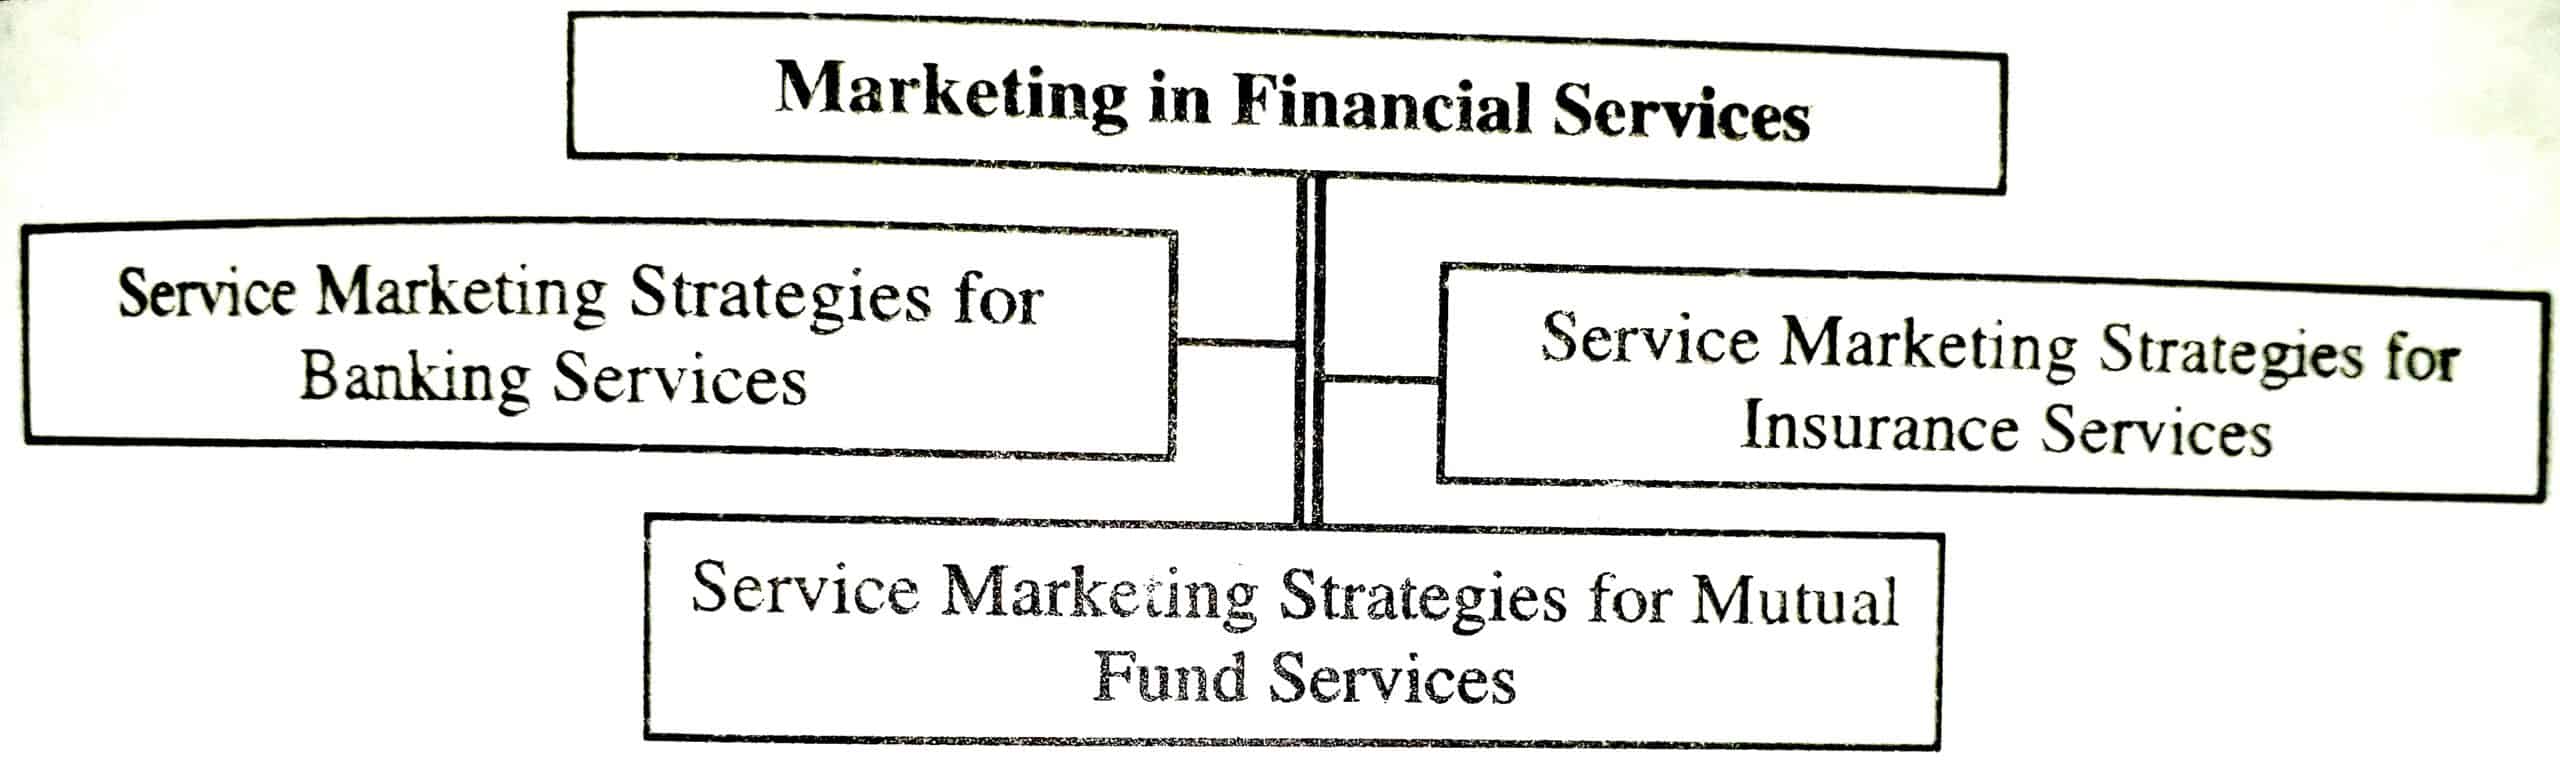 Marketing in Financial Services